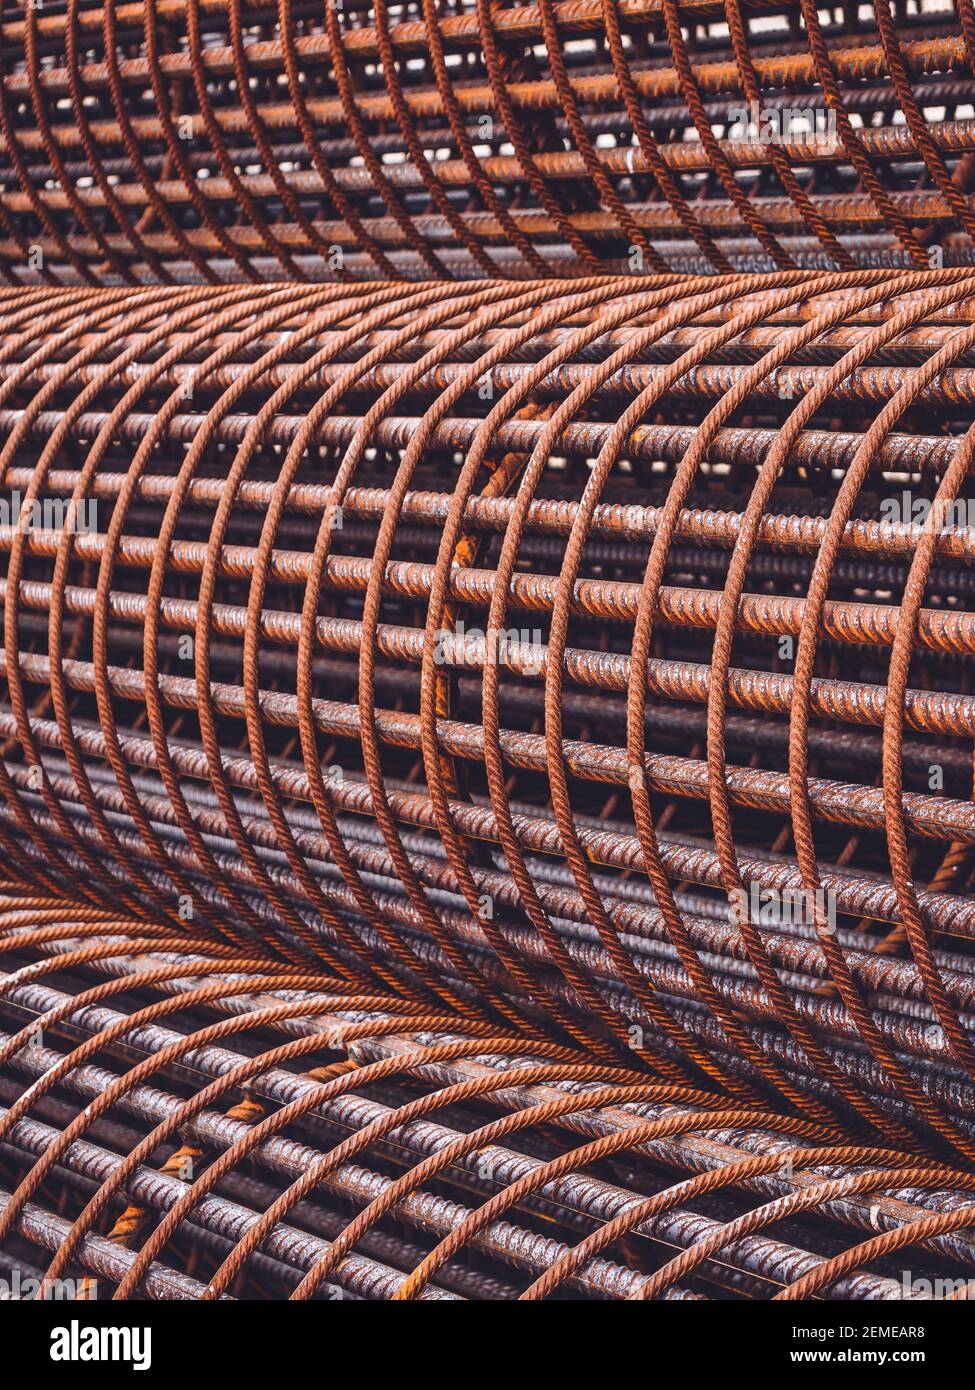 Iron on construction site. Rusty Iron Bundle for making reinforcement concrete . rebar for reinforce hole in the ground. Texture background net metal Stock Photo